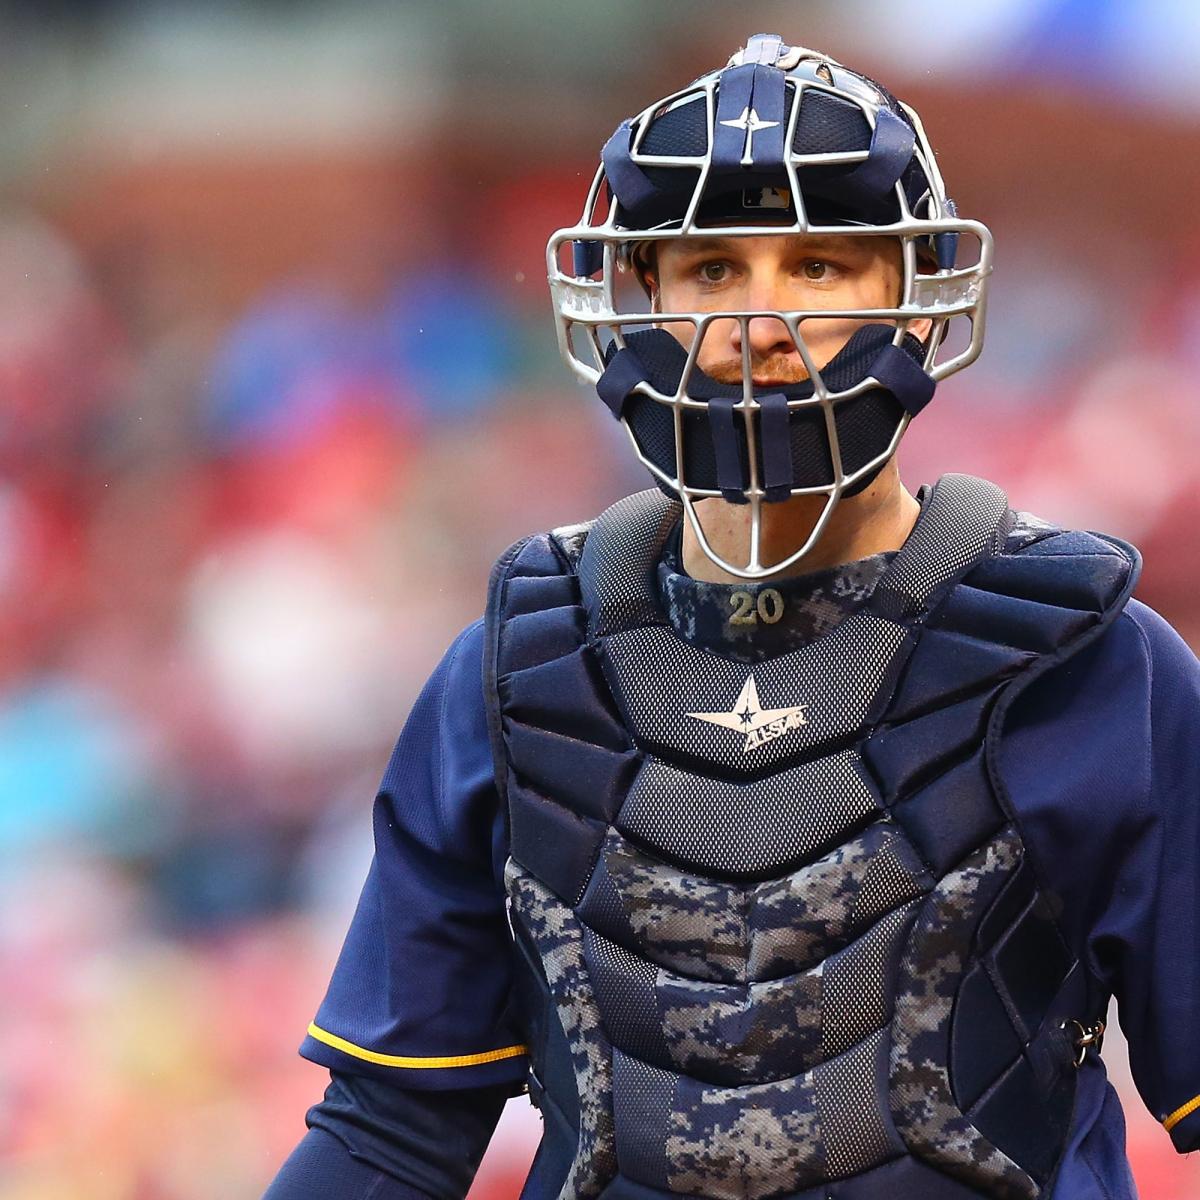 Brewers ink catcher Jonathan Lucroy to 5-year deal